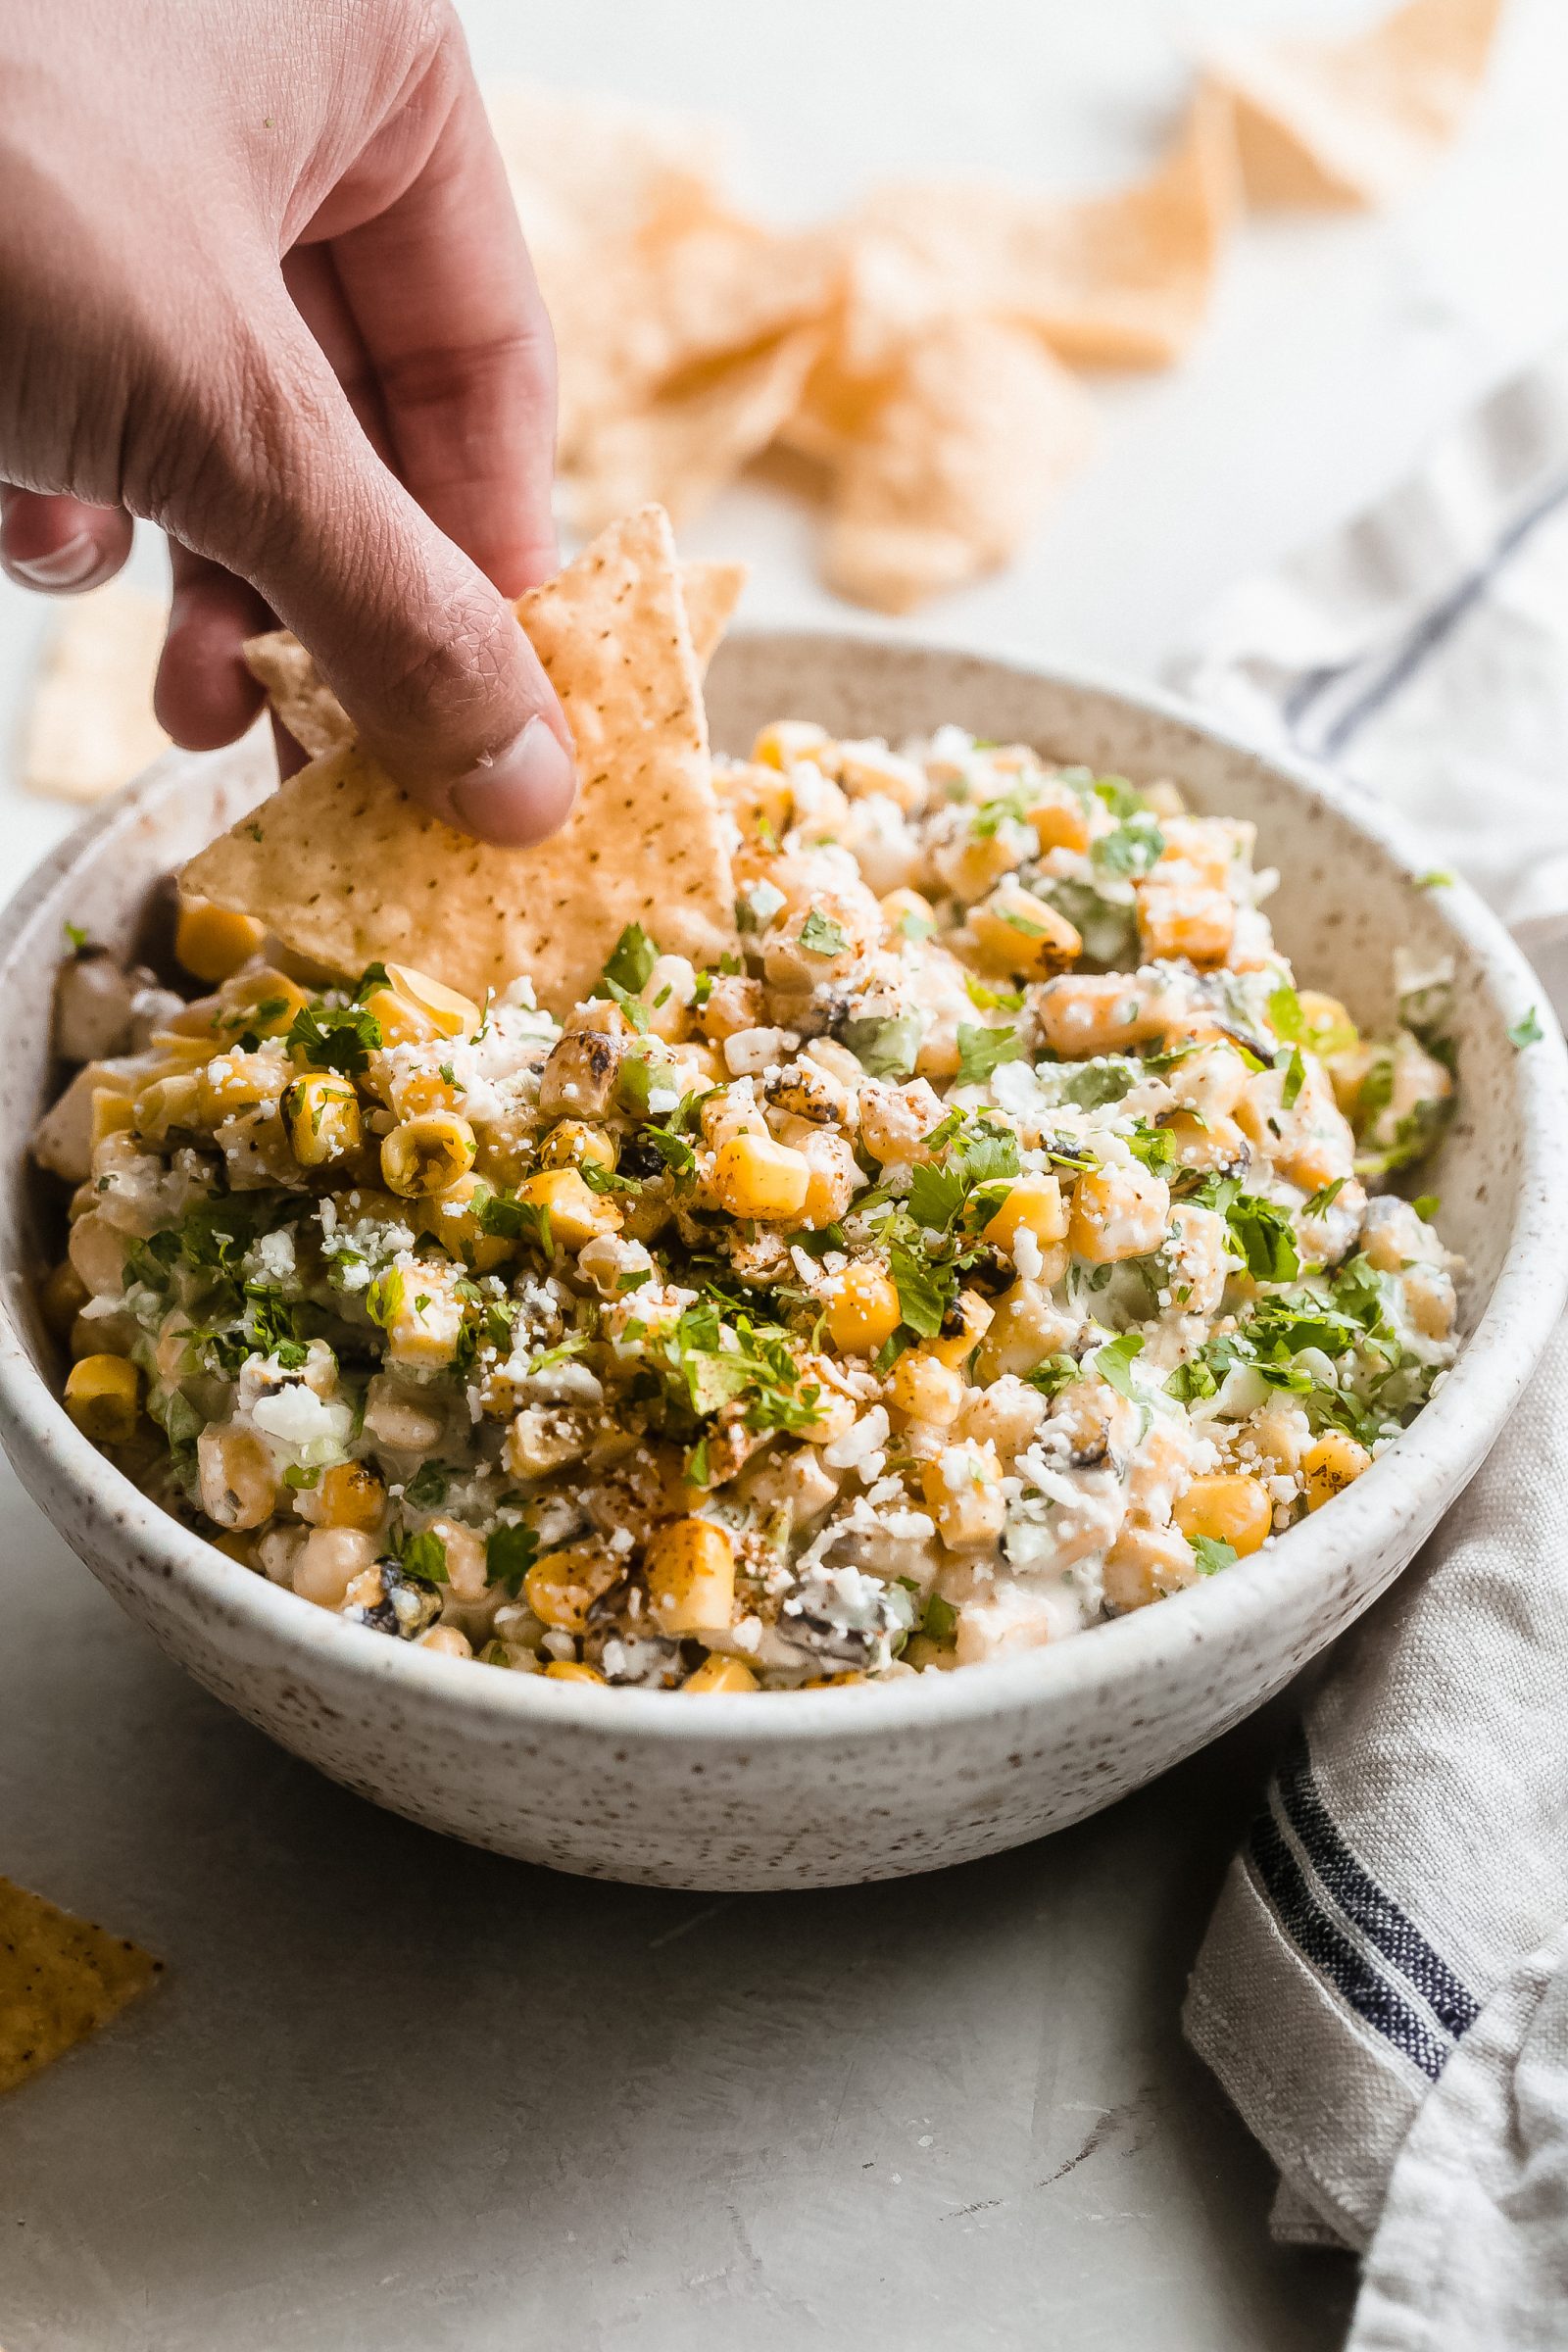 hand dipping corn tortillas in corn dip from bowl